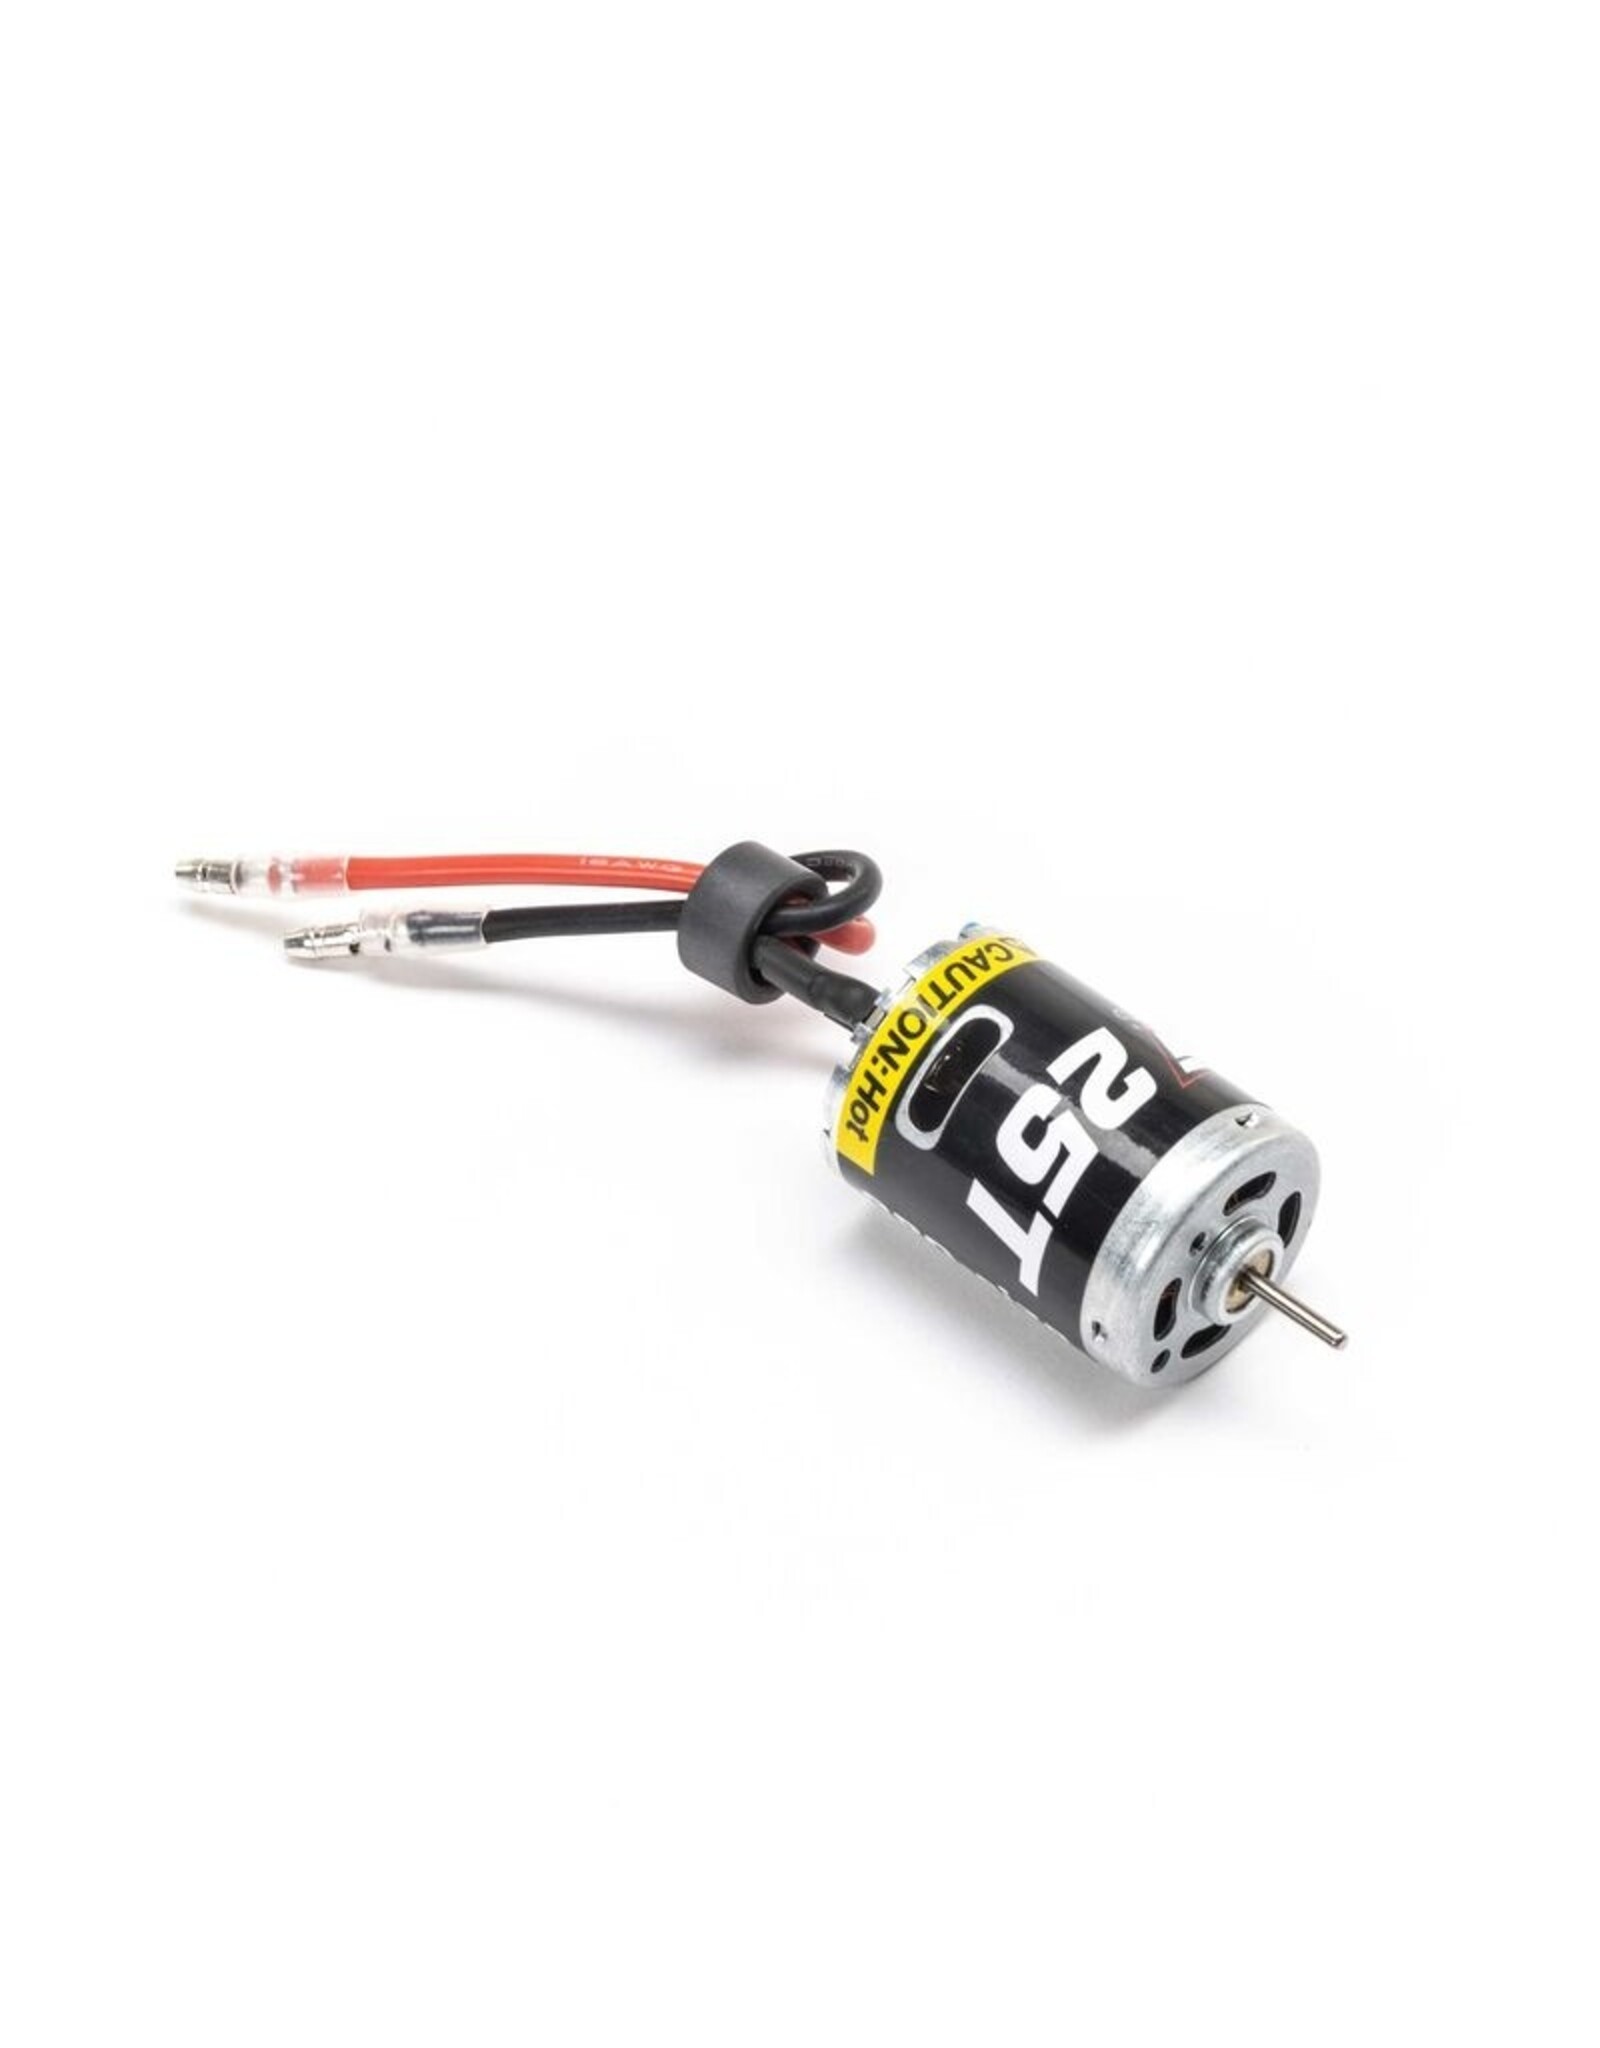 Losi LOS11002 25T Brushed 380 Size Motor